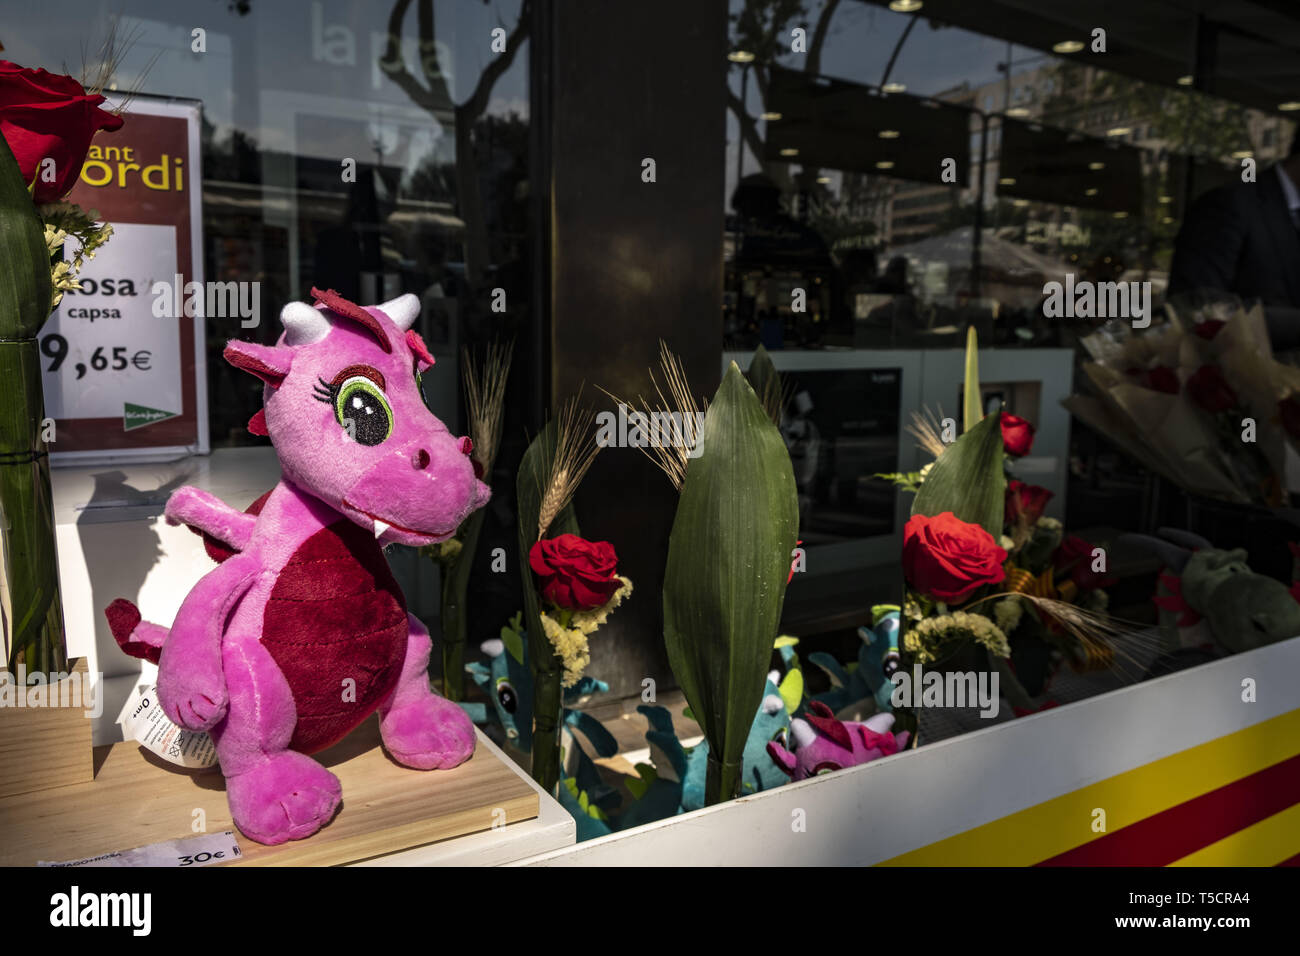 Barcelona, Catalonia, Spain. 23rd Apr, 2019. Stuffed animals representing  the traditional dead dragon by the Sant Jordi are seen next to red roses  during the Sant Jordi day celebration.The festivity of Sant